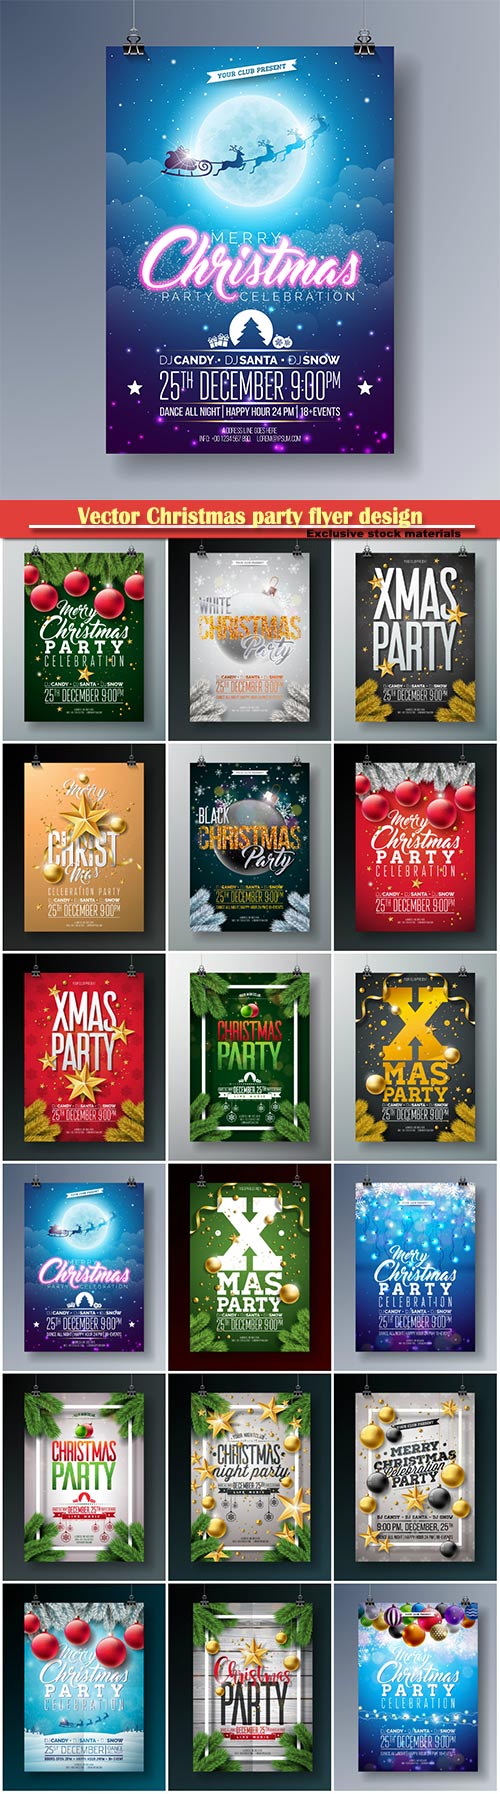 Vector Christmas party flyer design, holiday typography elements